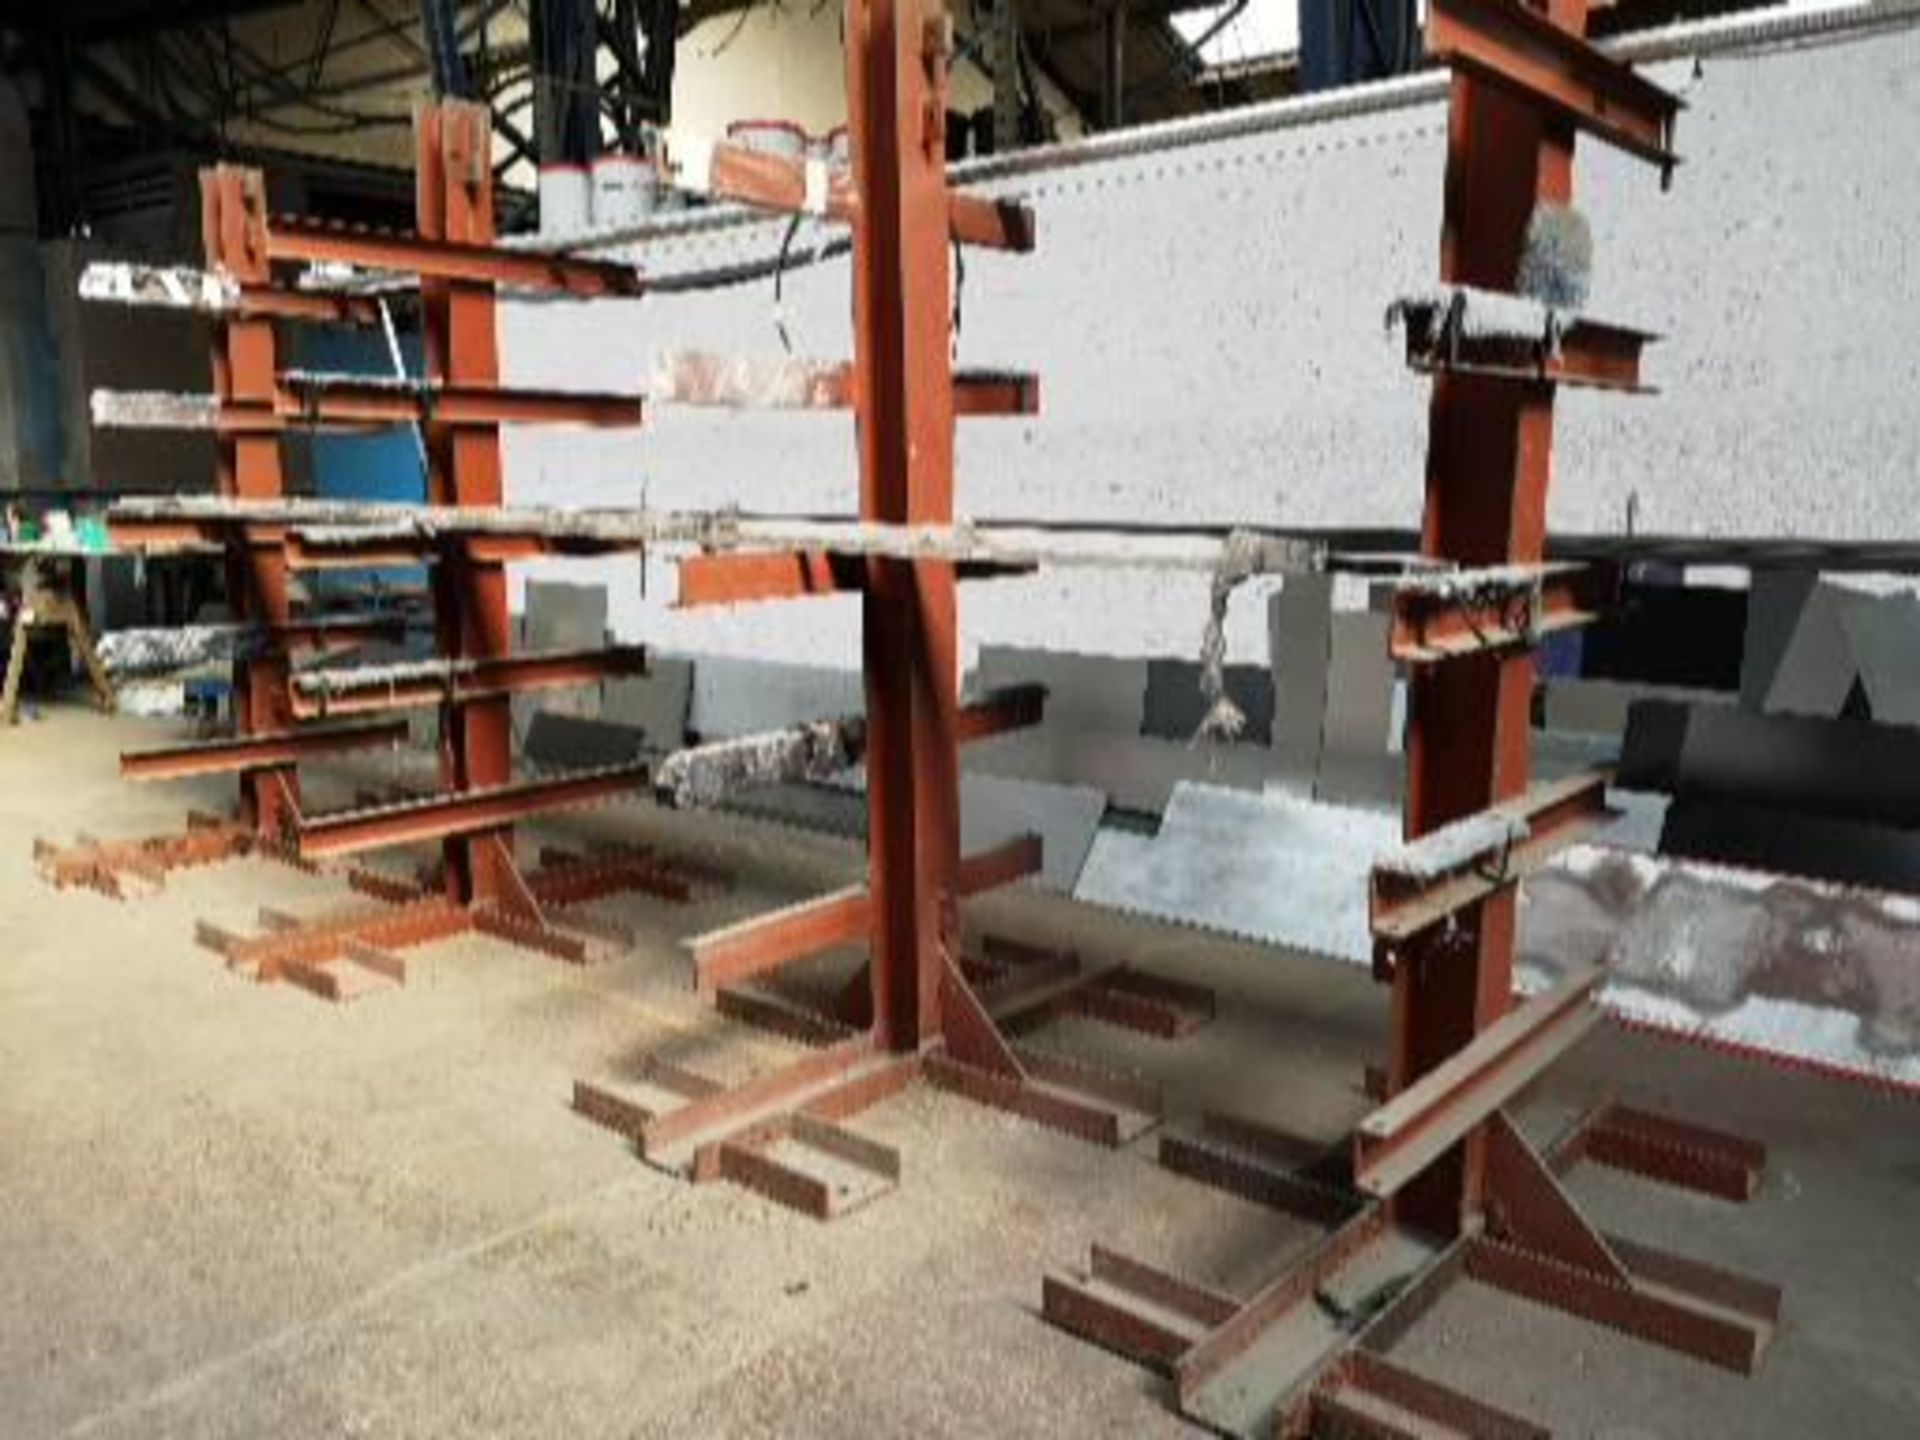 4 Extremely Heavy-Duty Metal A Frames for Holding Steel or Aluminium (unbranded) *PLUS VAT* - Image 2 of 2